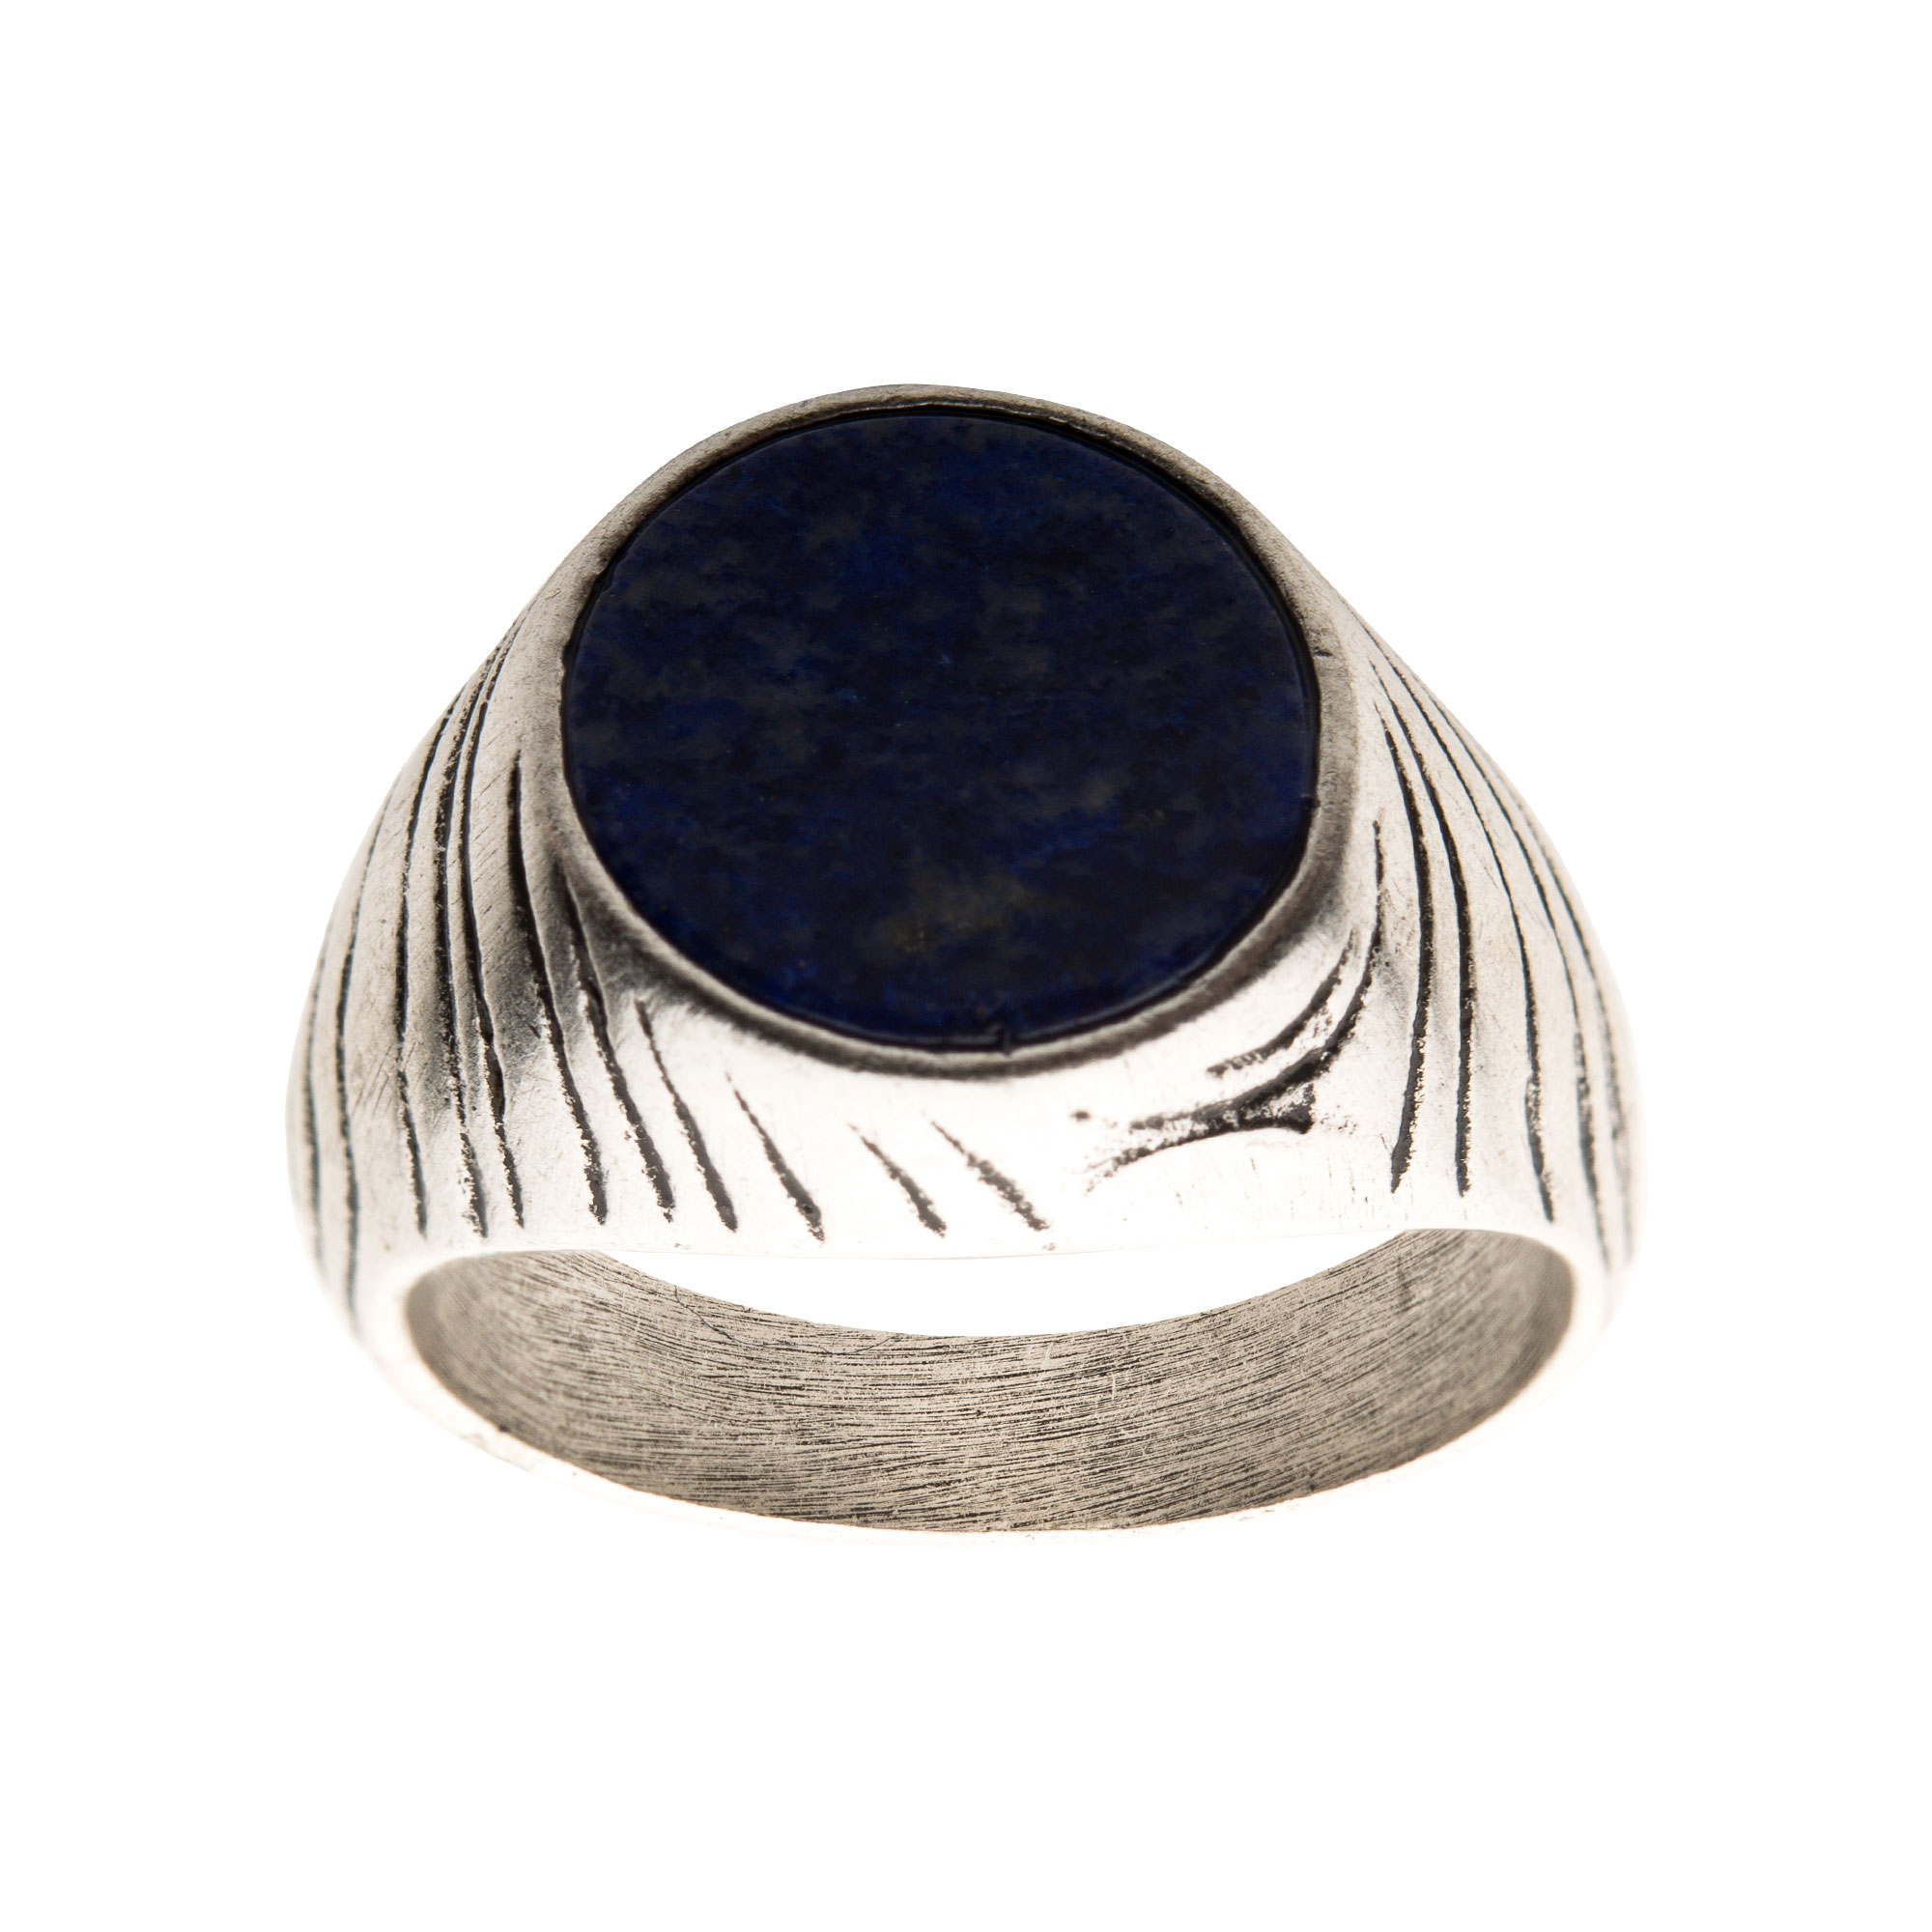 Stainless Steel Silver Plated with Lapis Stone Ring Image 2 Ken Walker Jewelers Gig Harbor, WA